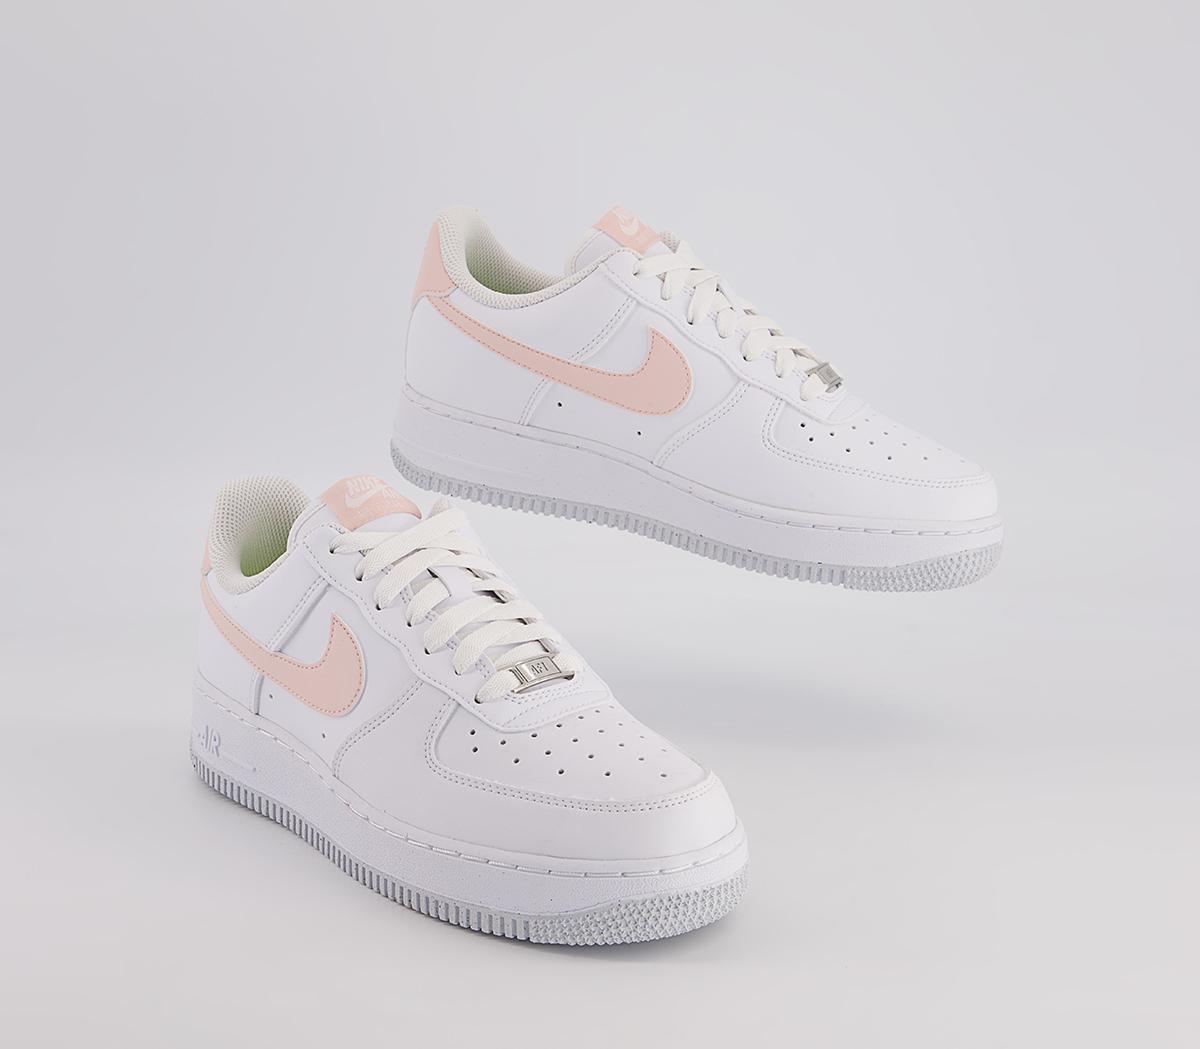 Nike Air Force 1 07 Trainers White Pale Coral Black Metallic Silver ...